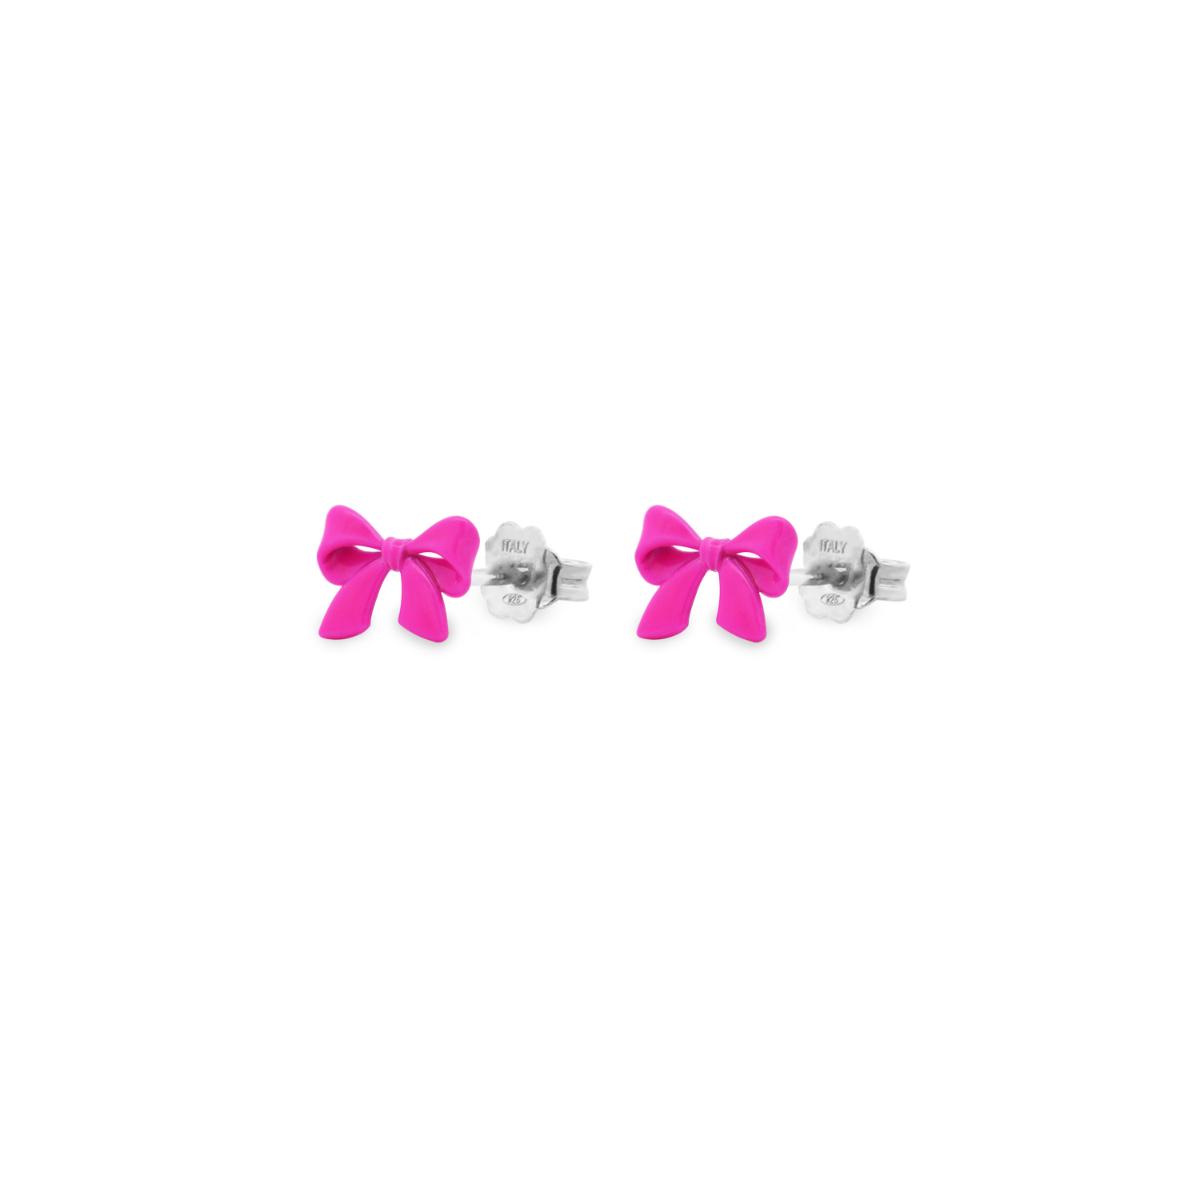 Earrings - Pair of earrings chic bow neon pink - CANDY BOW - 1 | Rue des Mille